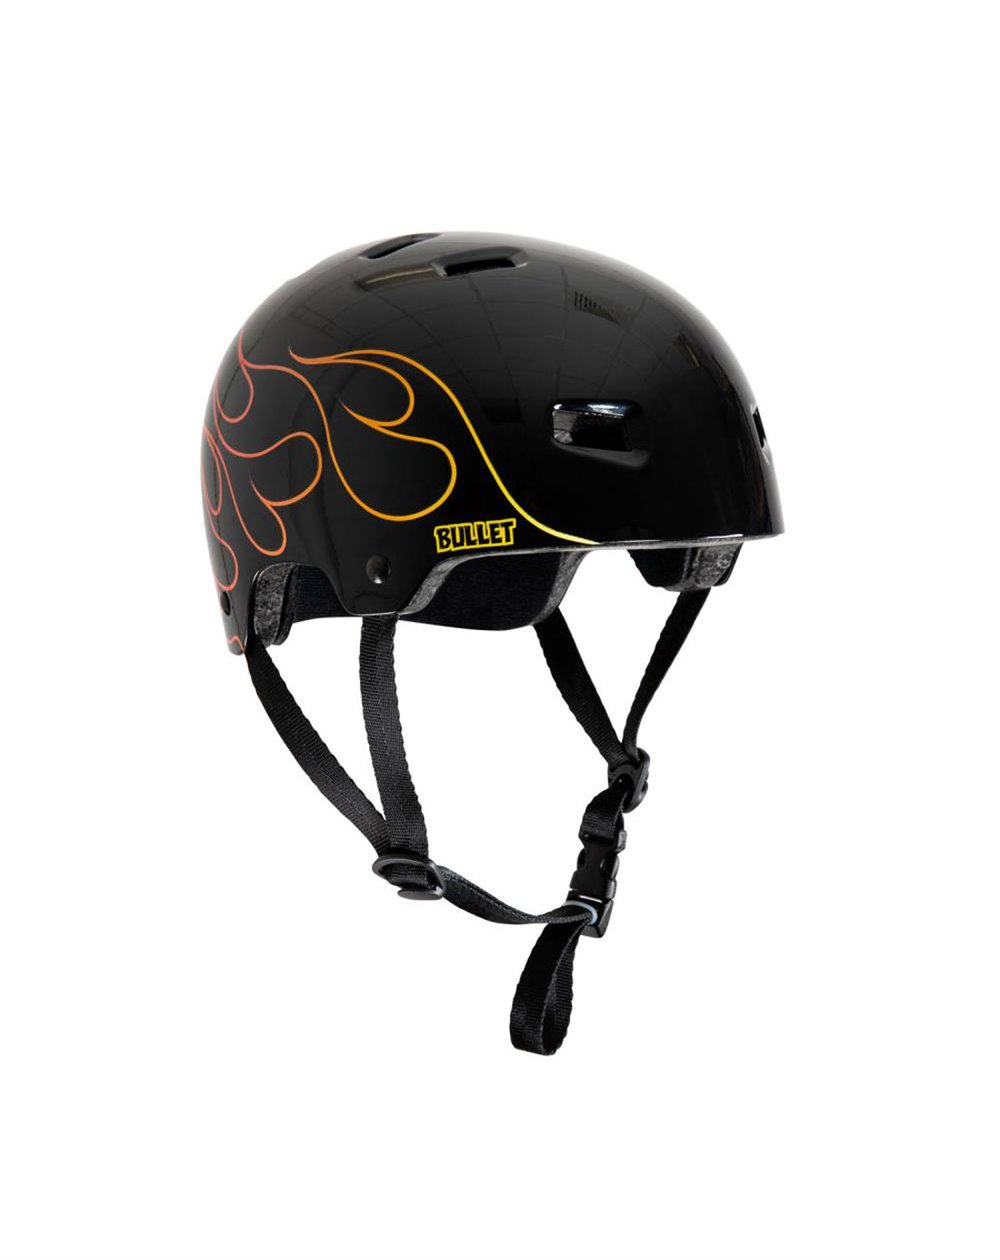 Bullet Safety Gear Capacete Skate T35 Flame Youth